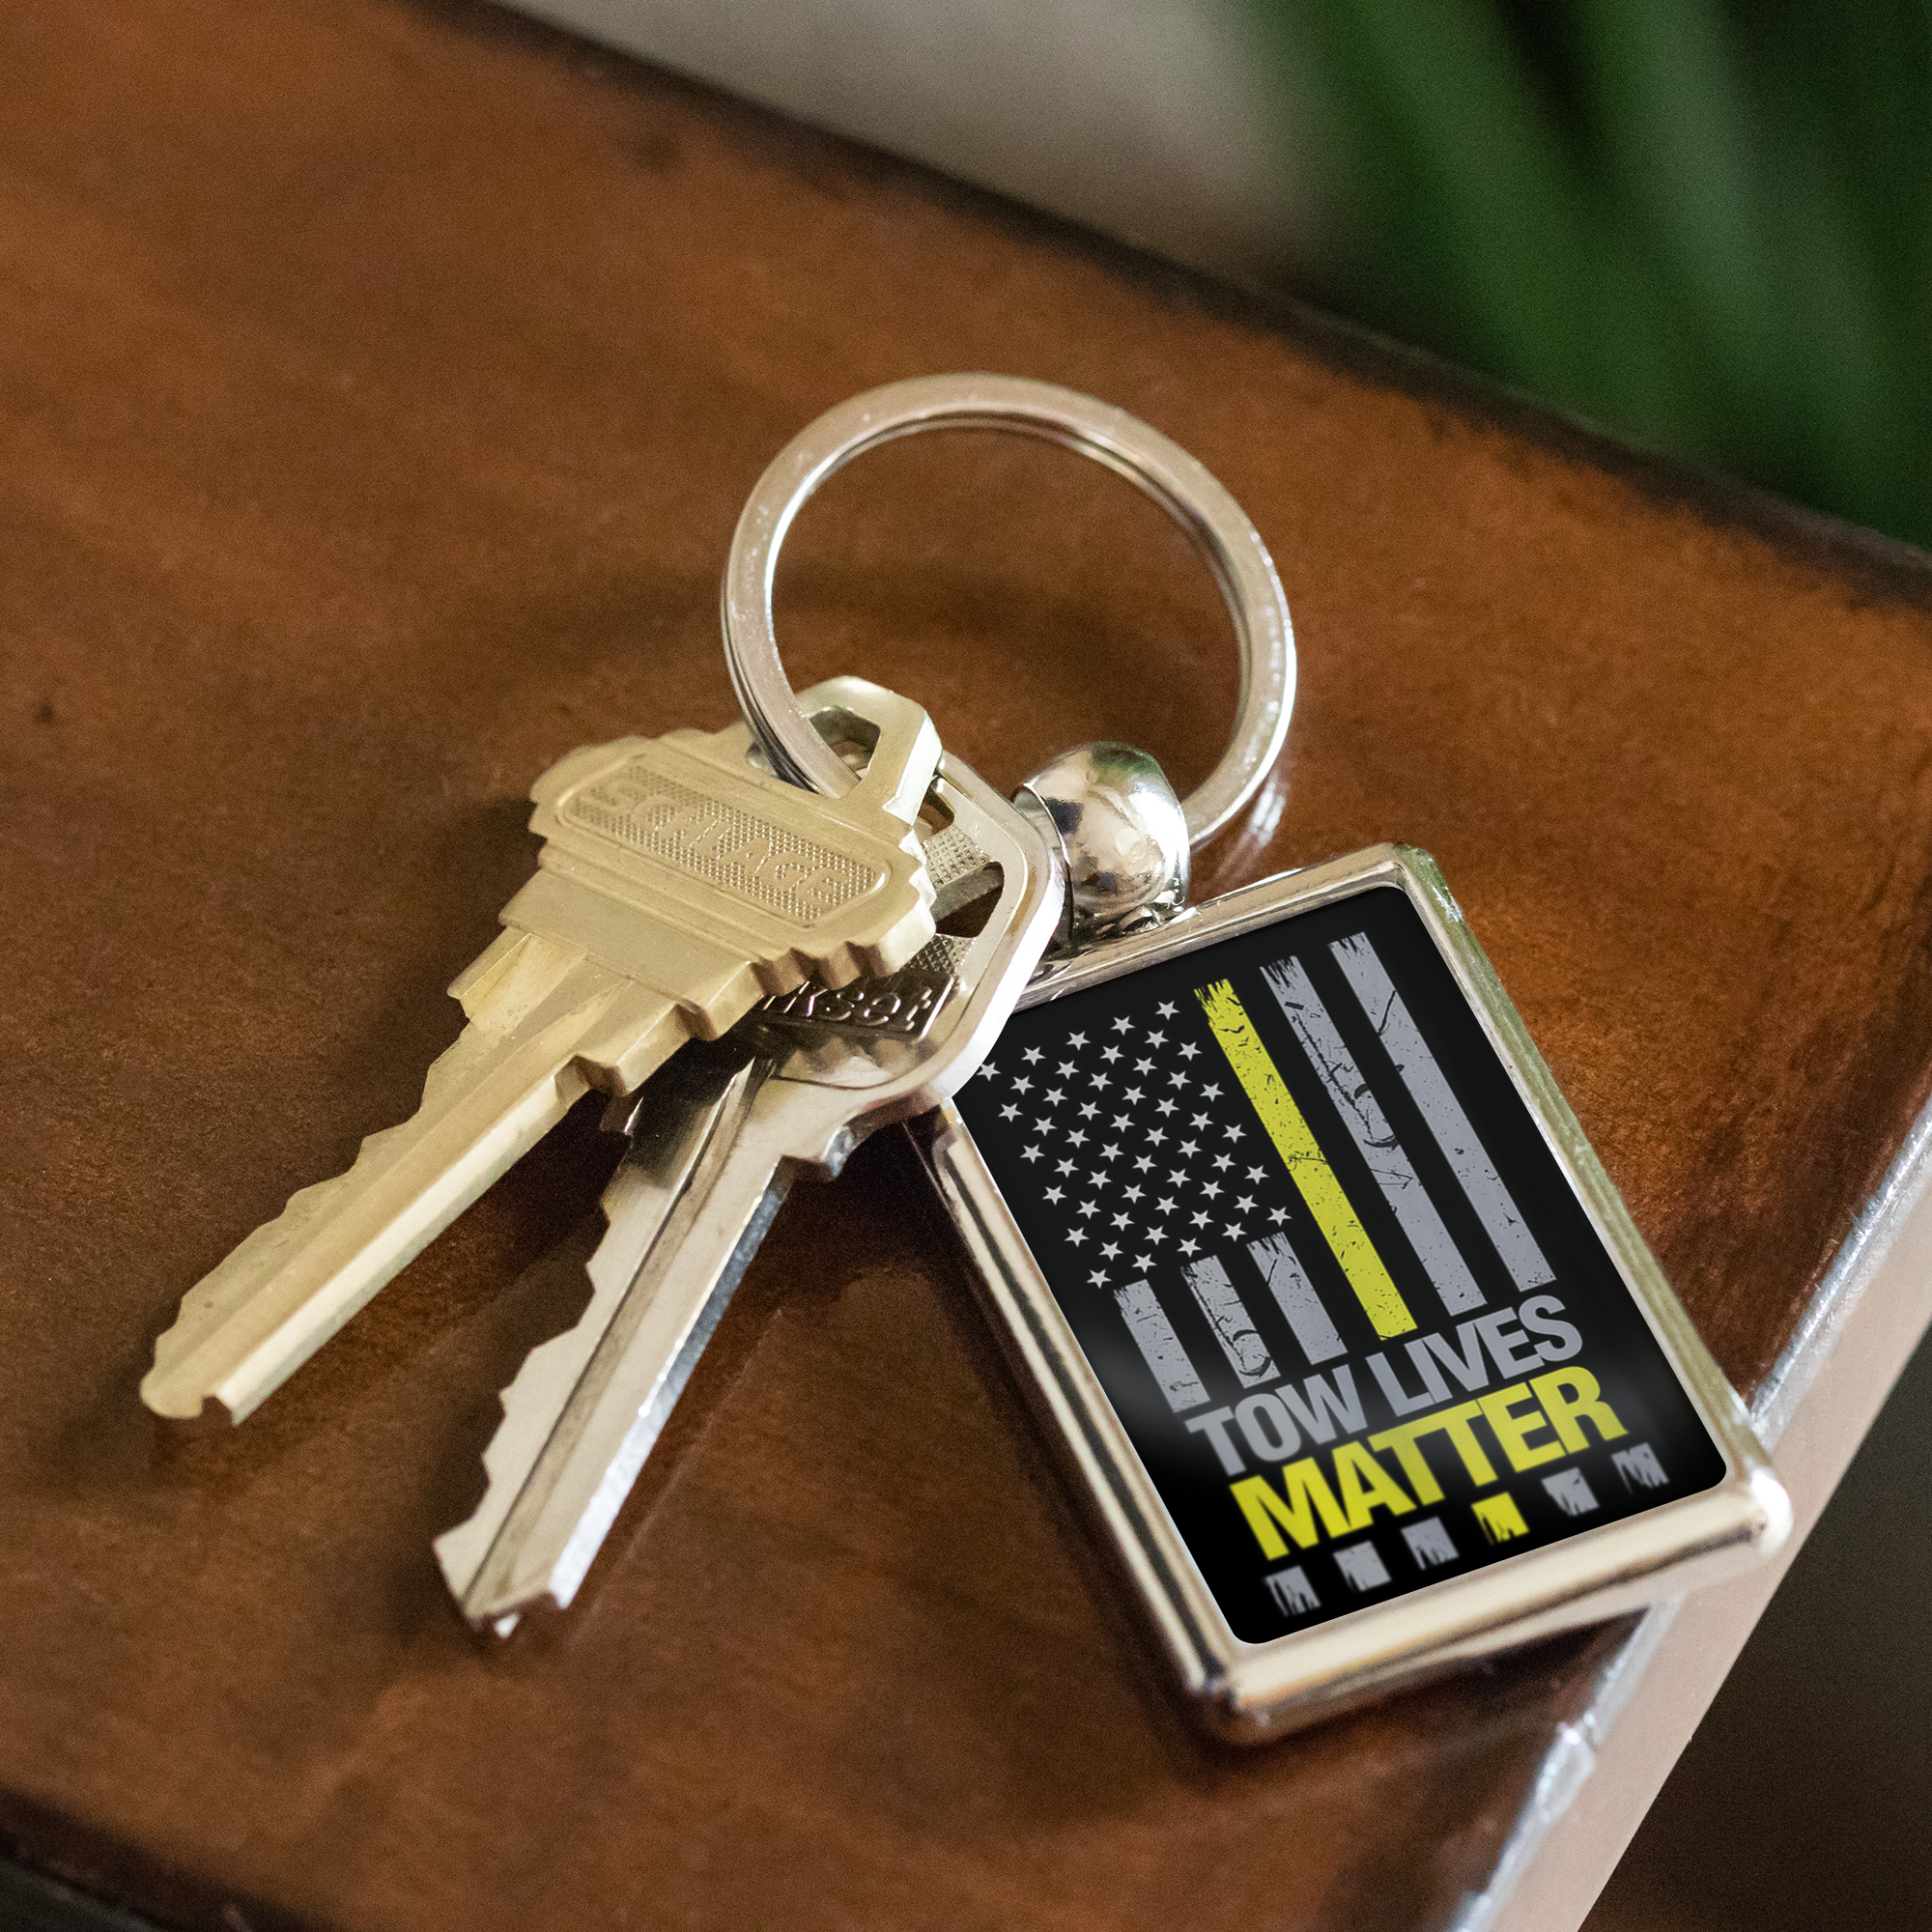 Tow Lives Matter Keychain